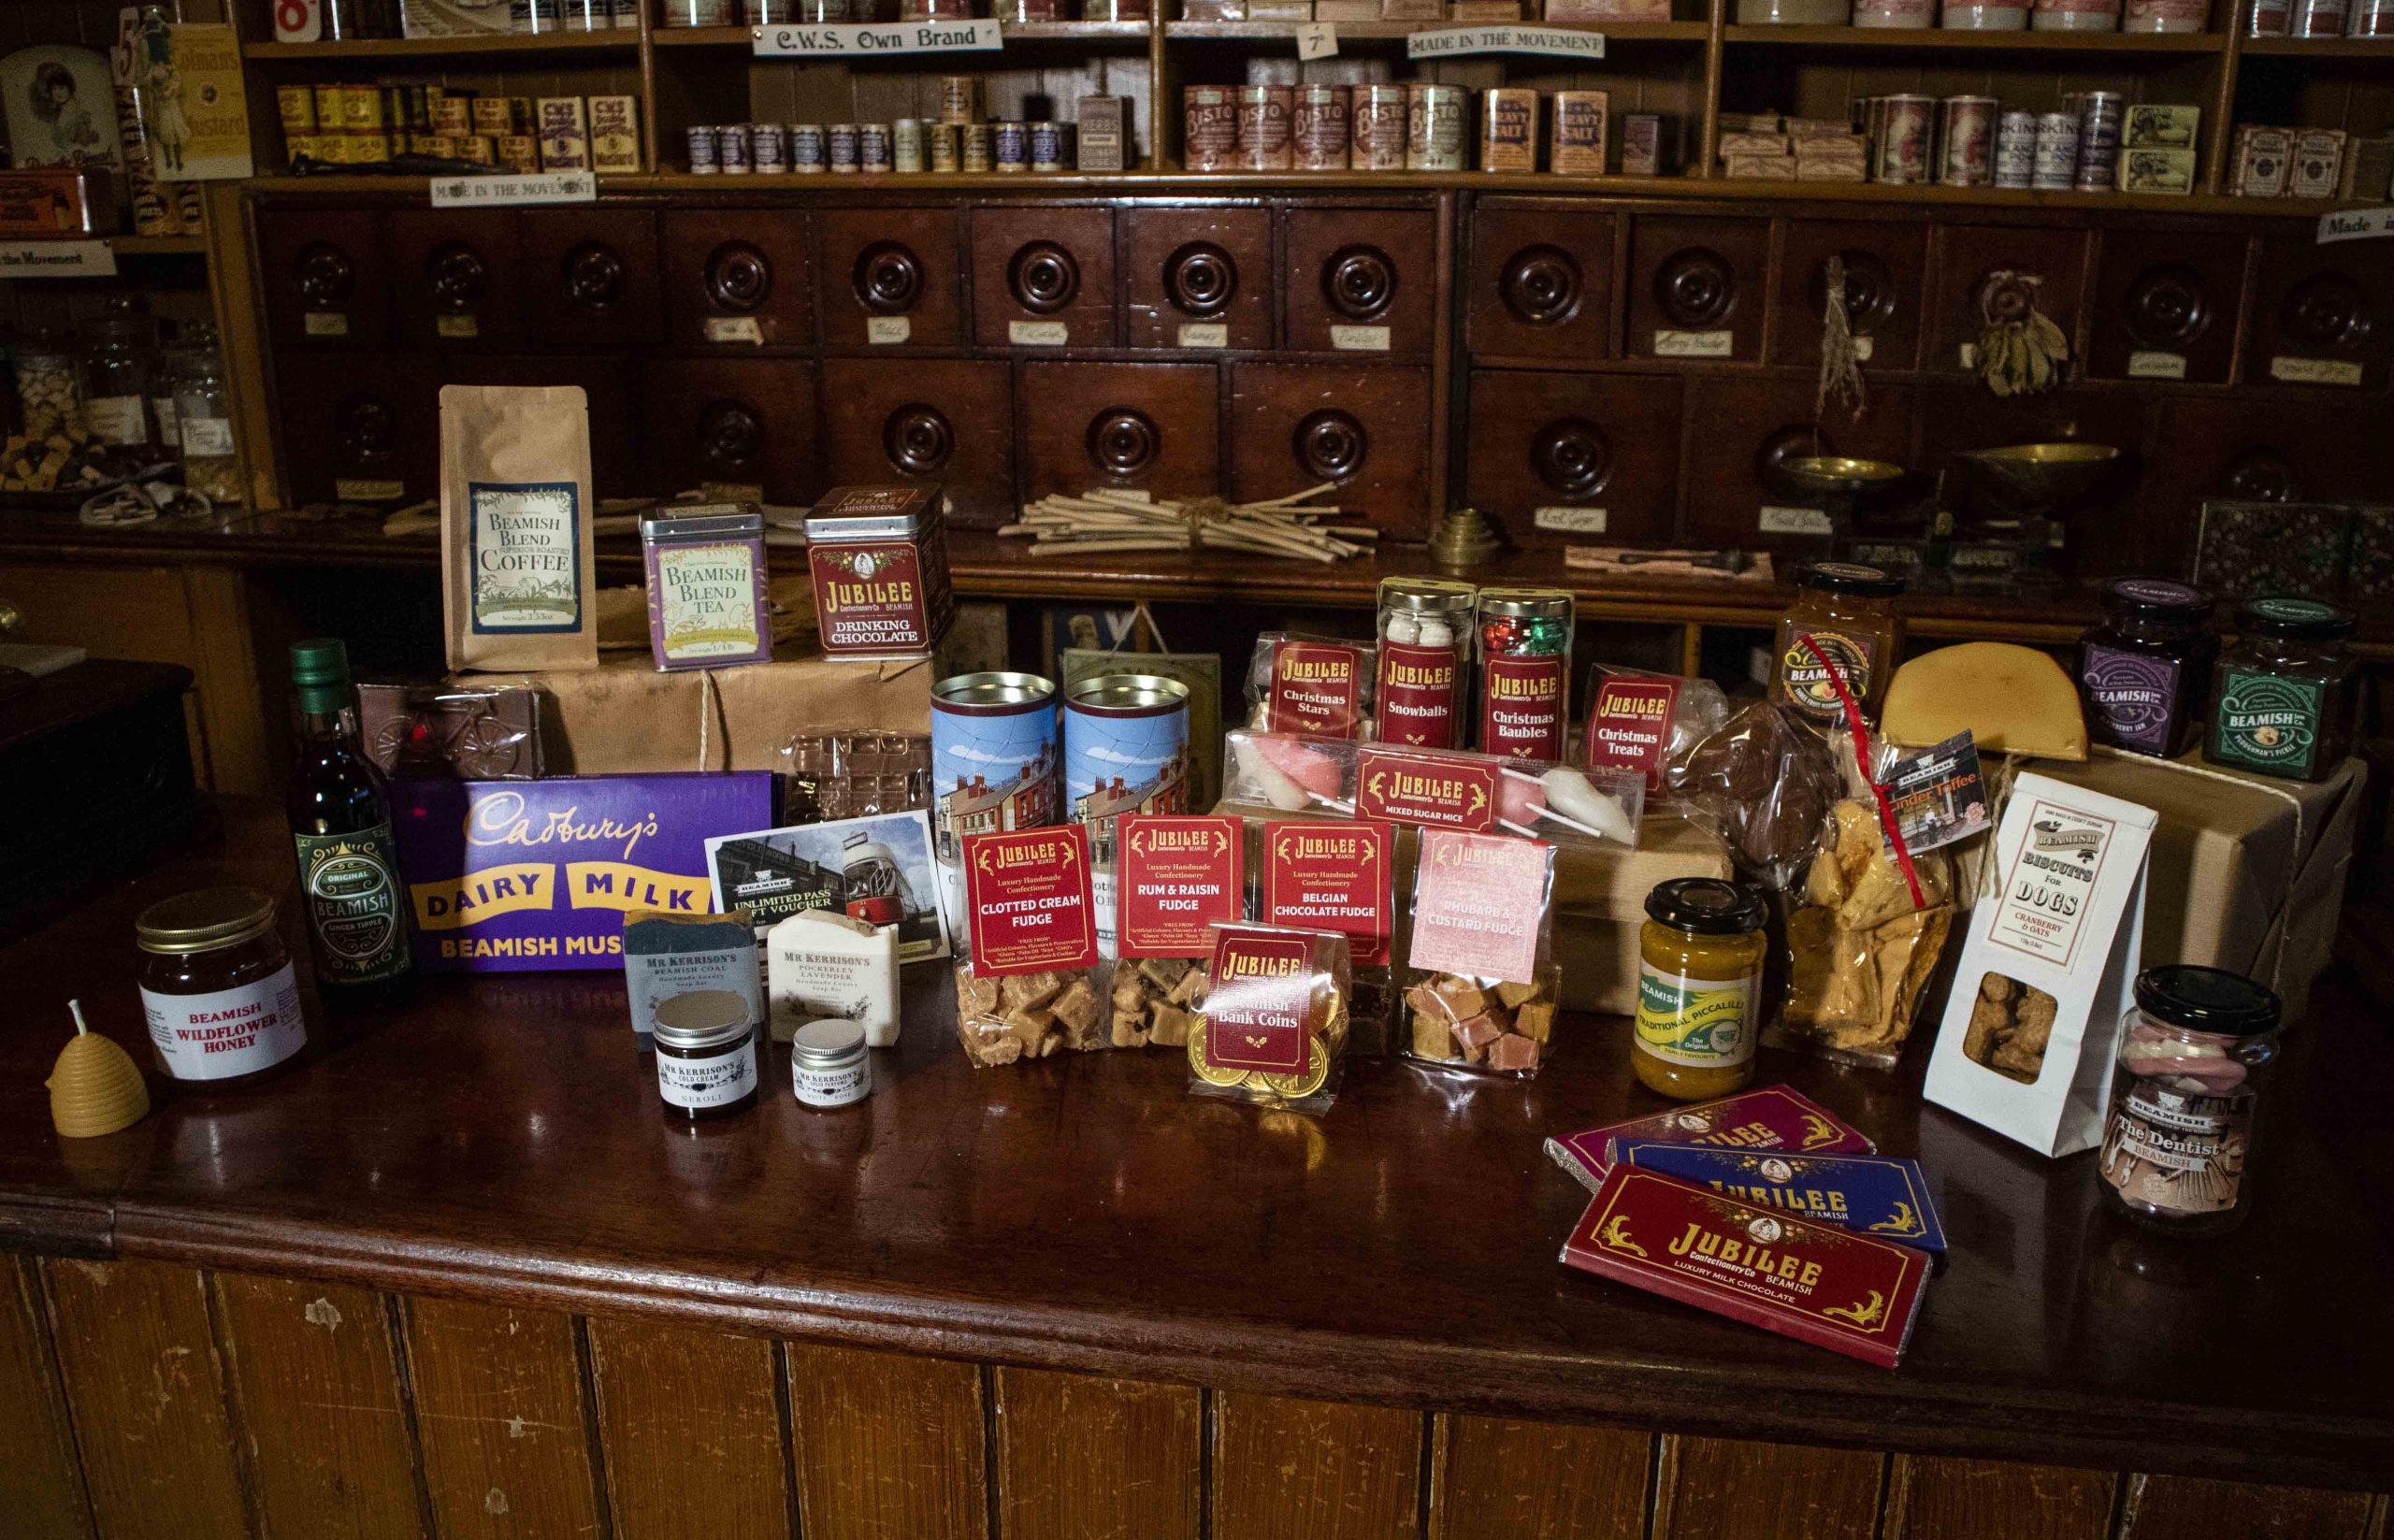 Beamish Museum Inviting Nominations for a Random Act of Kindness